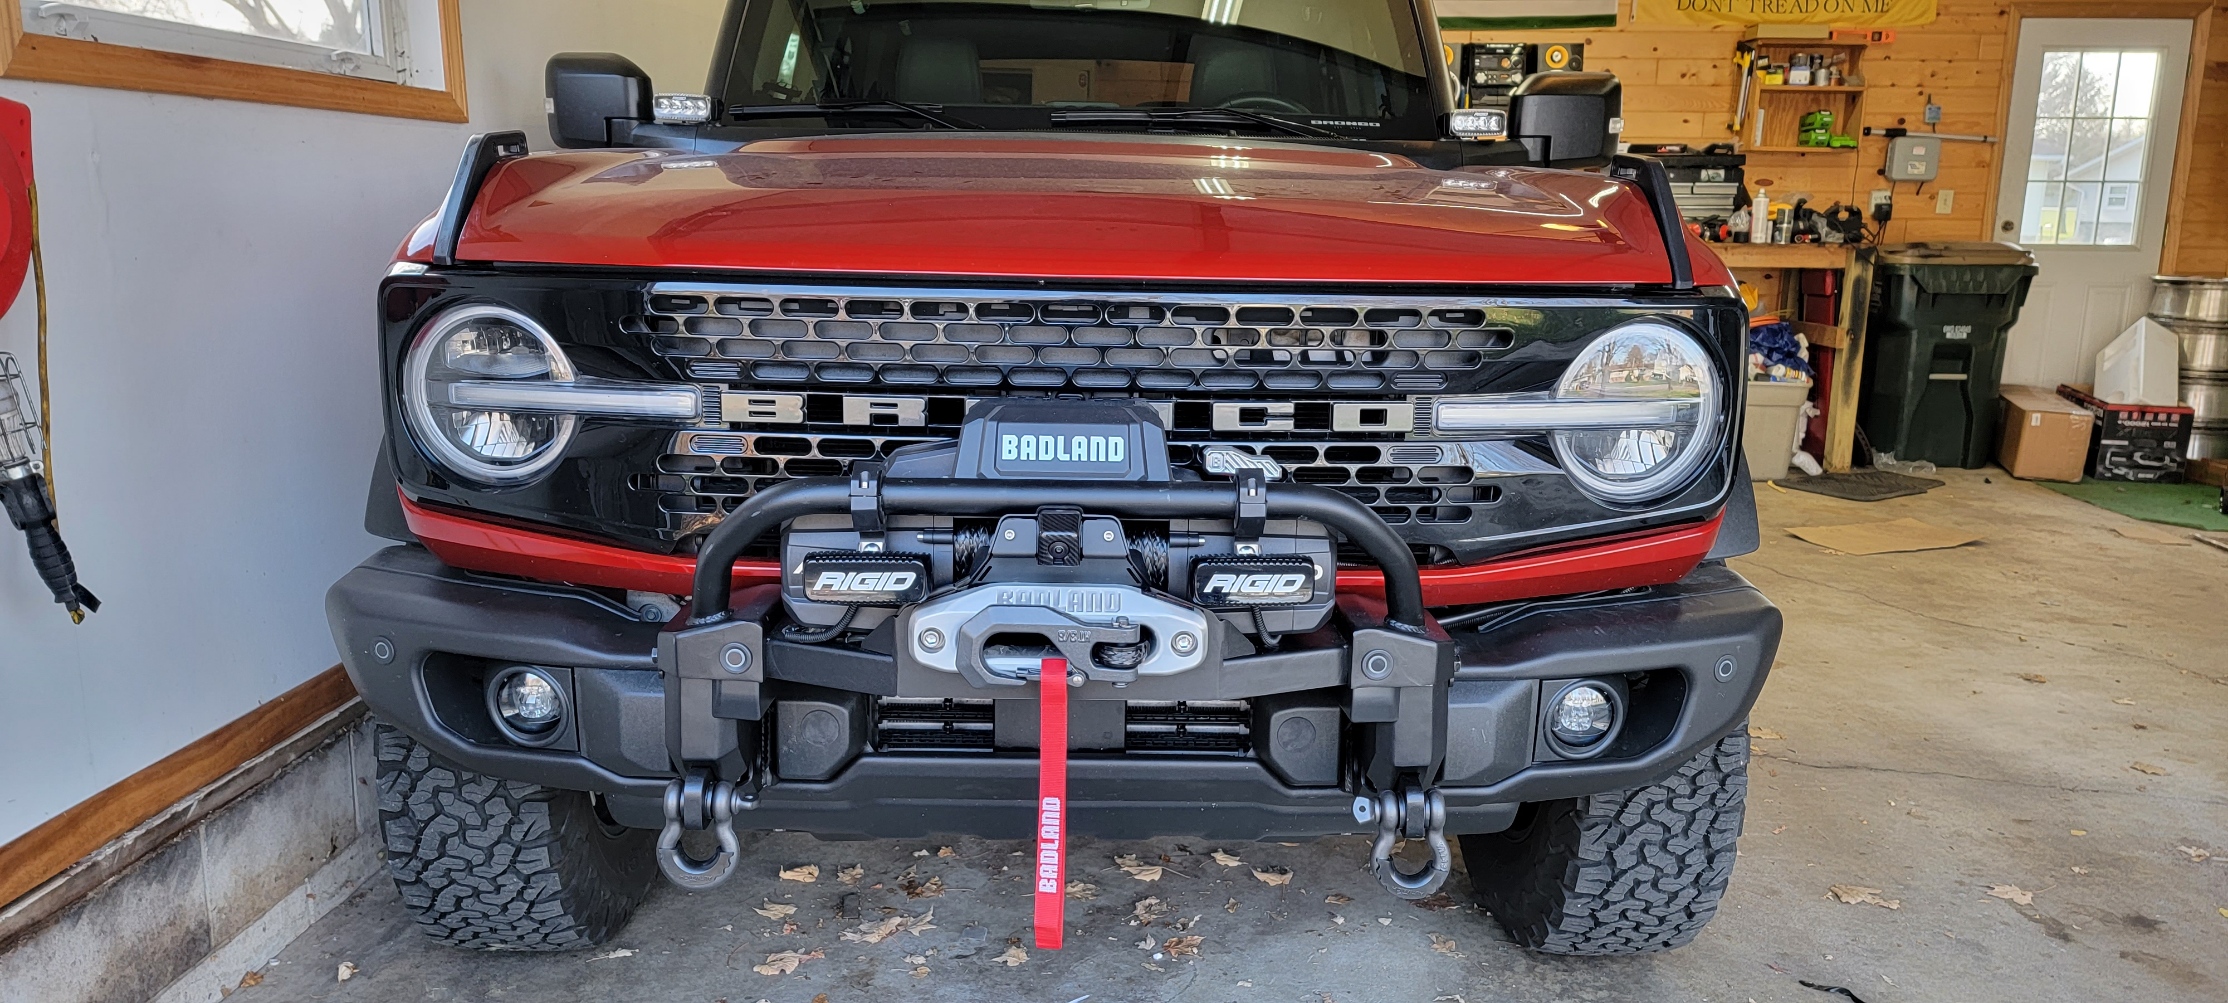 Ford Bronco High Mount Winch Plate installed on Capable Bumper 1916FD3C-D752-4890-ADD4-FE9A3B5B6D34